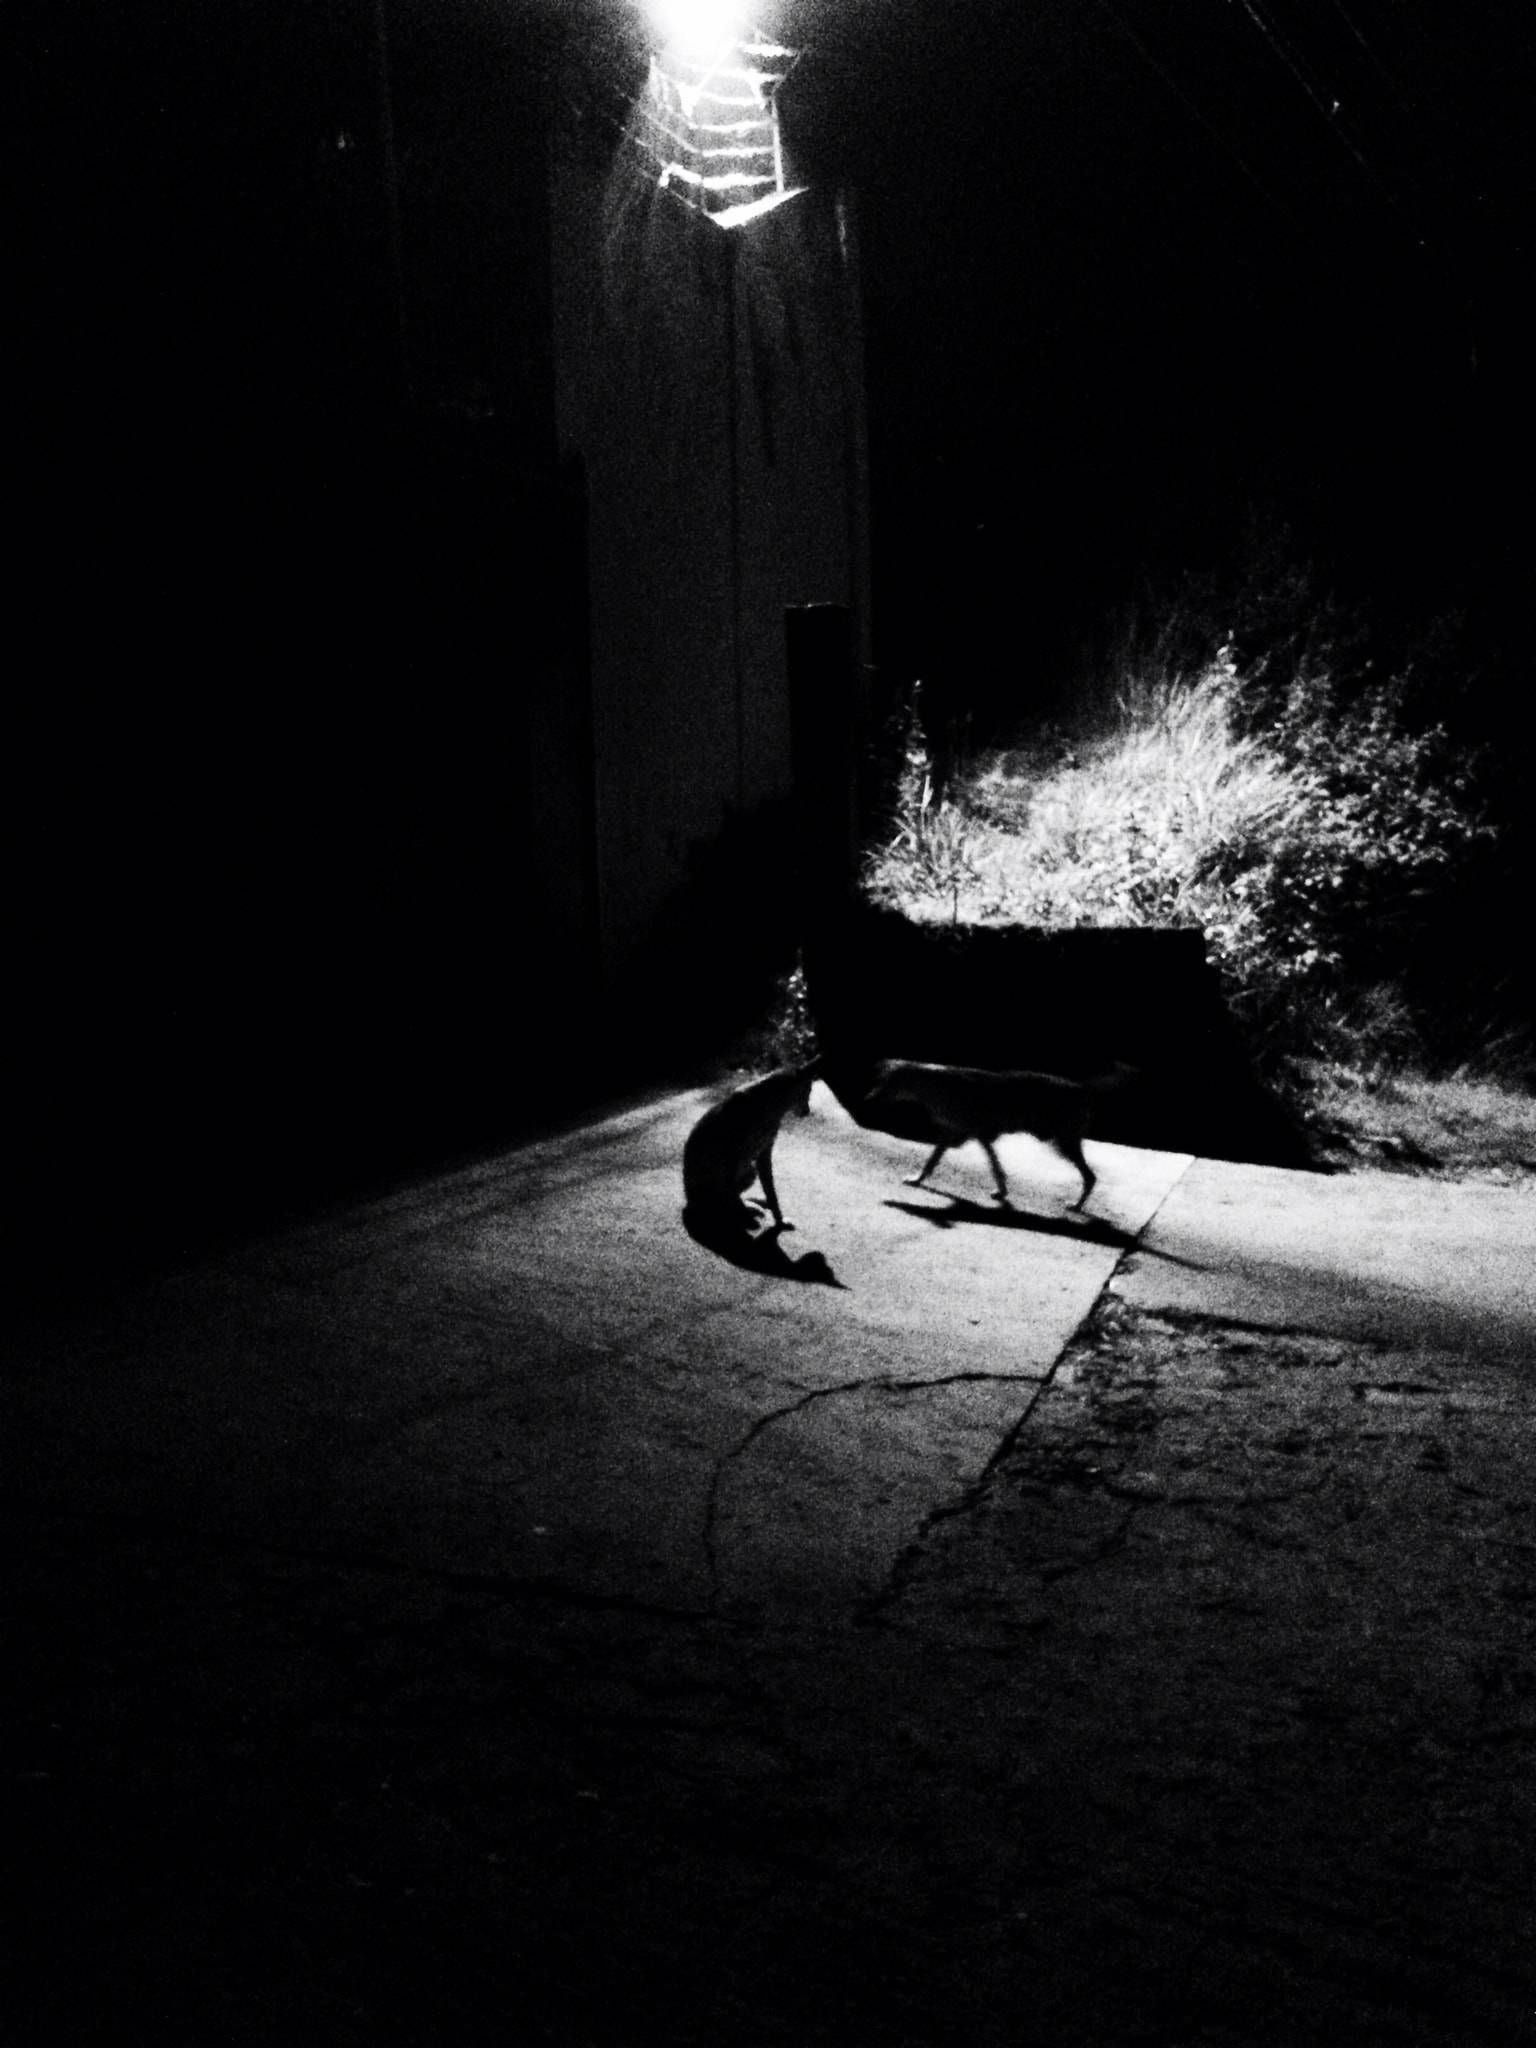 Dogs in the dark outside.